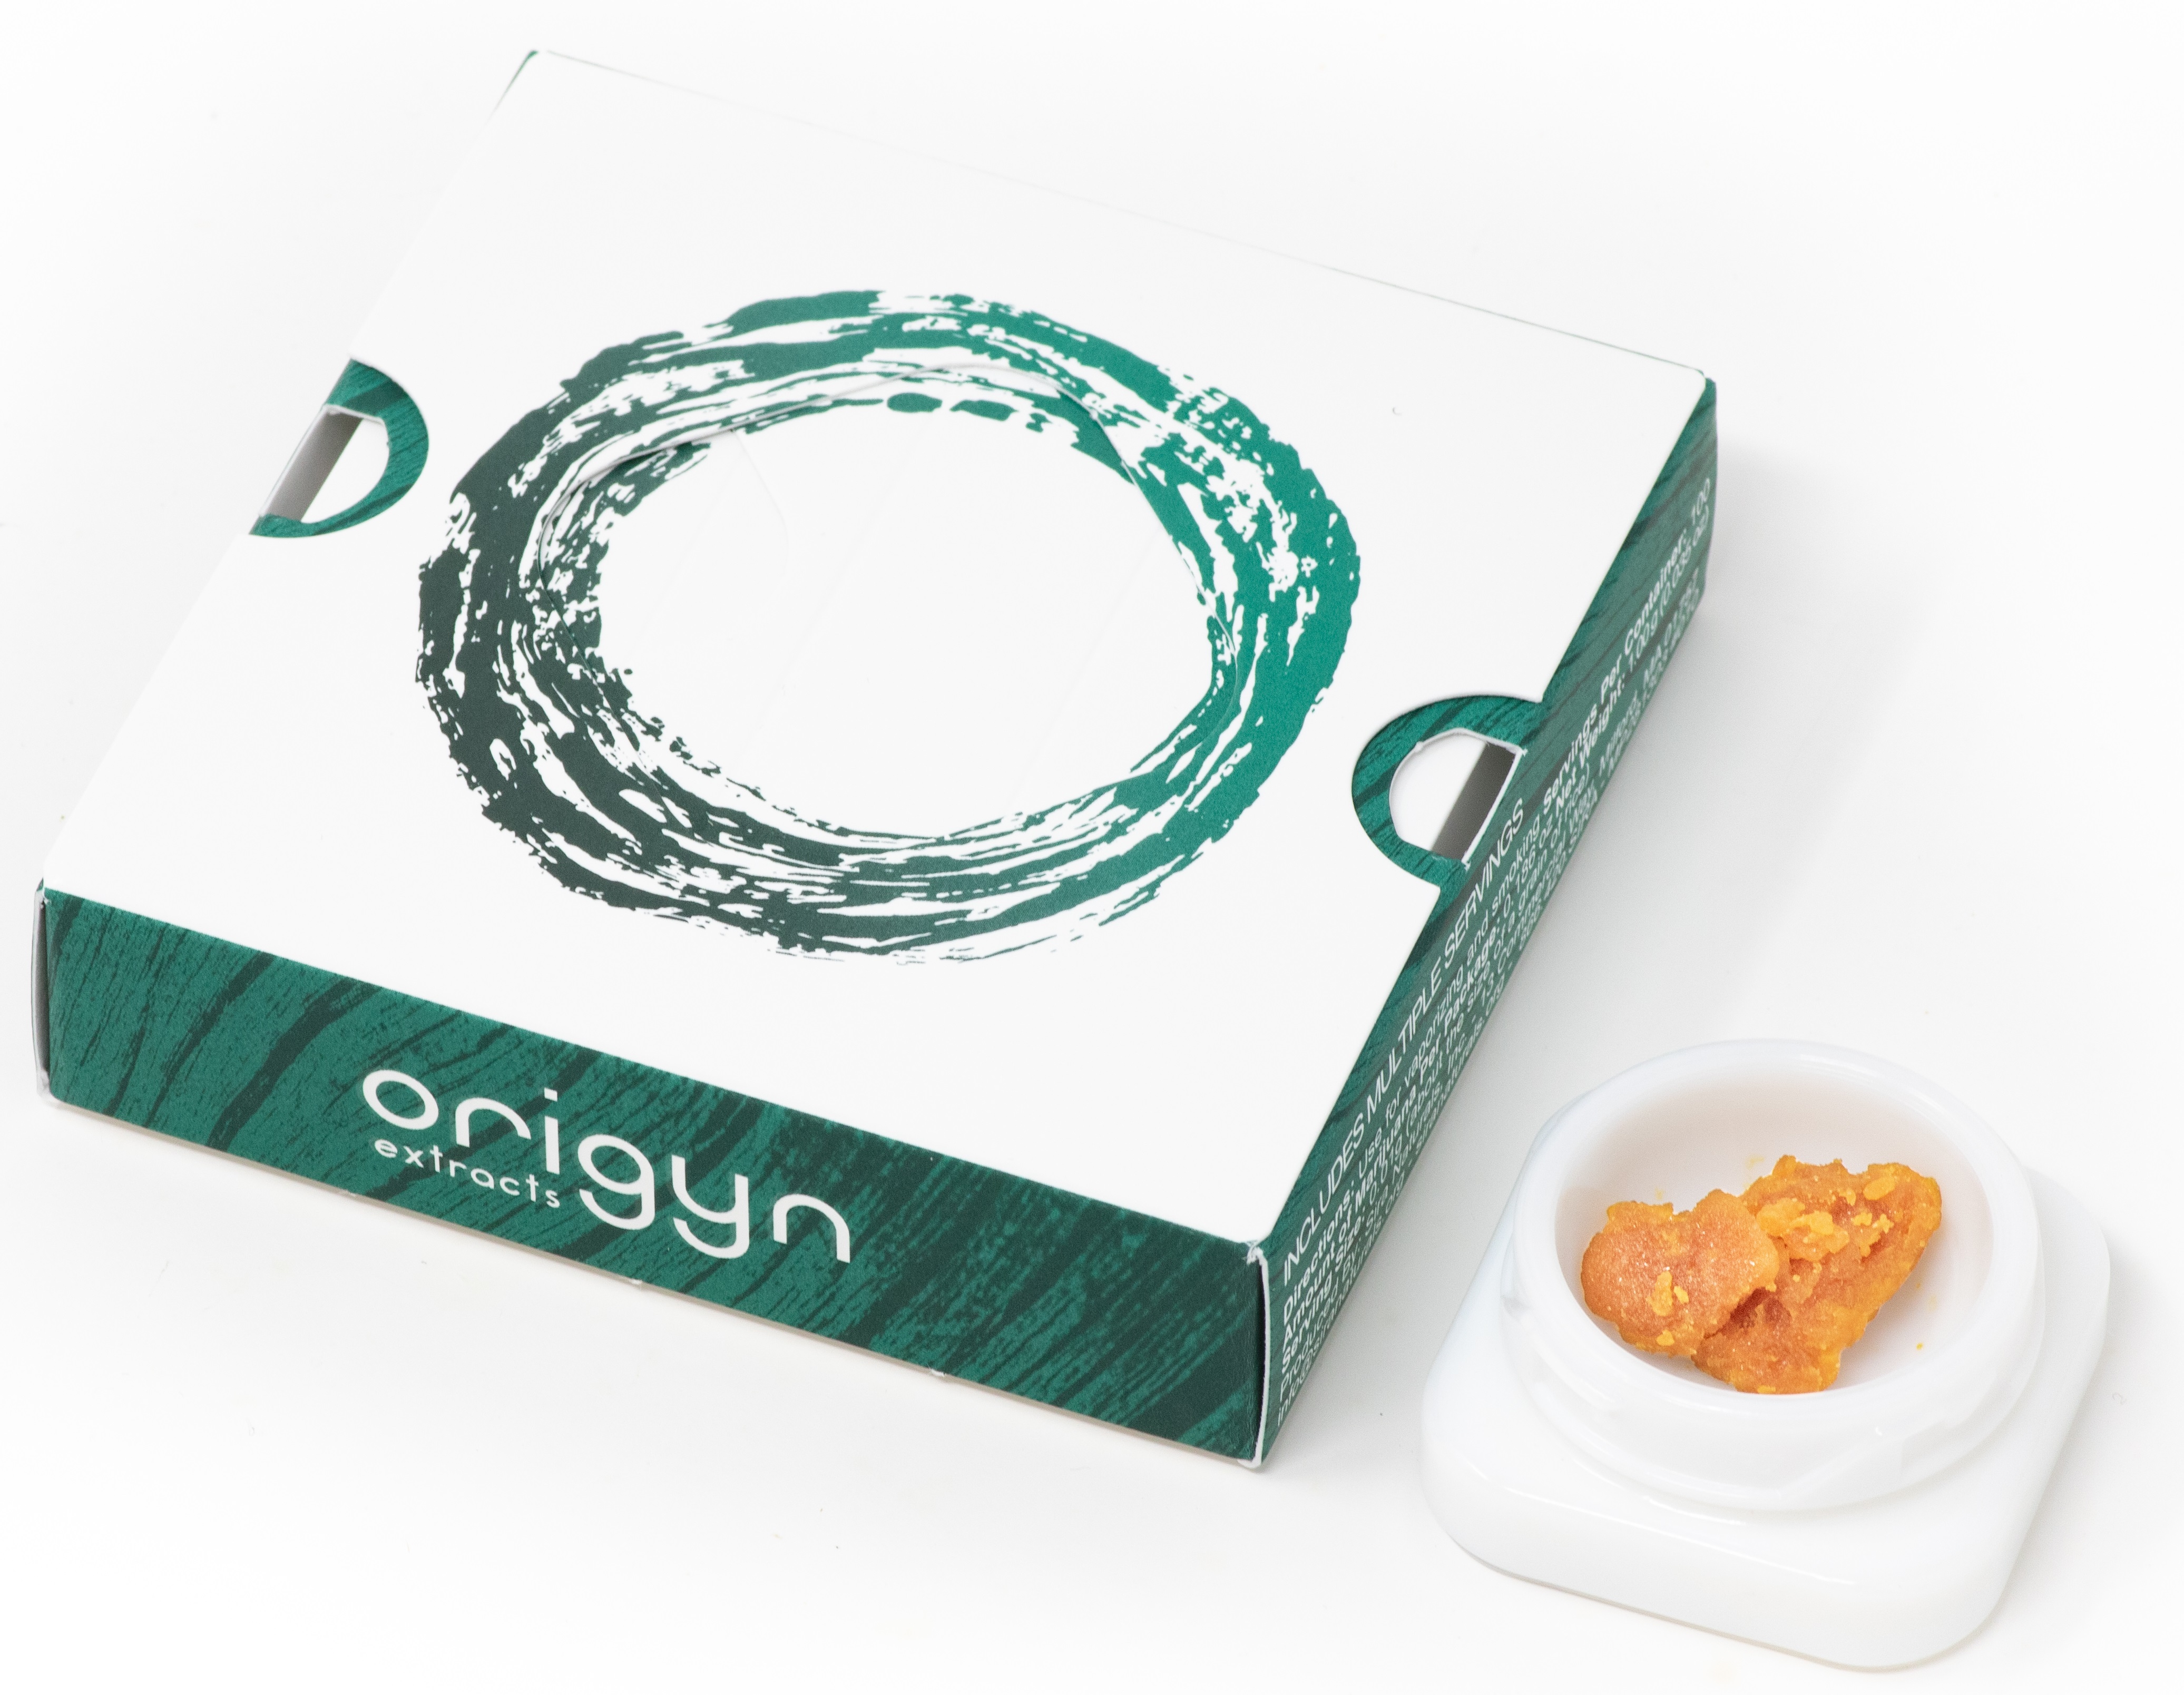 Origyn LA Confidential Wax 1g by Origyn Extracts at Sira Naturals - Somerville | Leafly